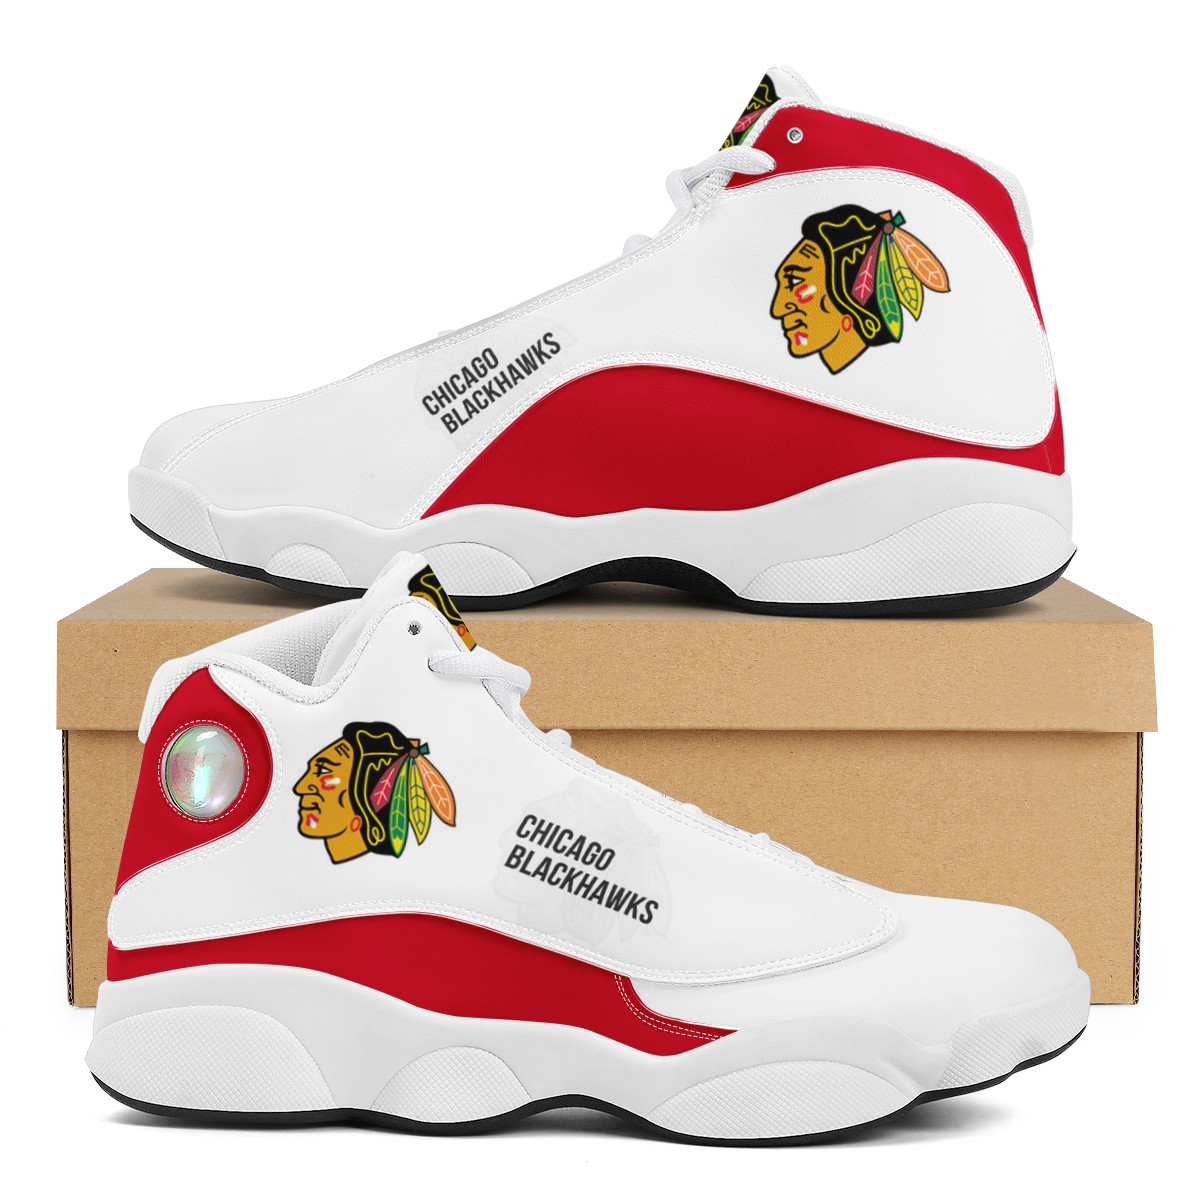 Men's Chicago Blackhawks Limited Edition JD13 Sneakers 001